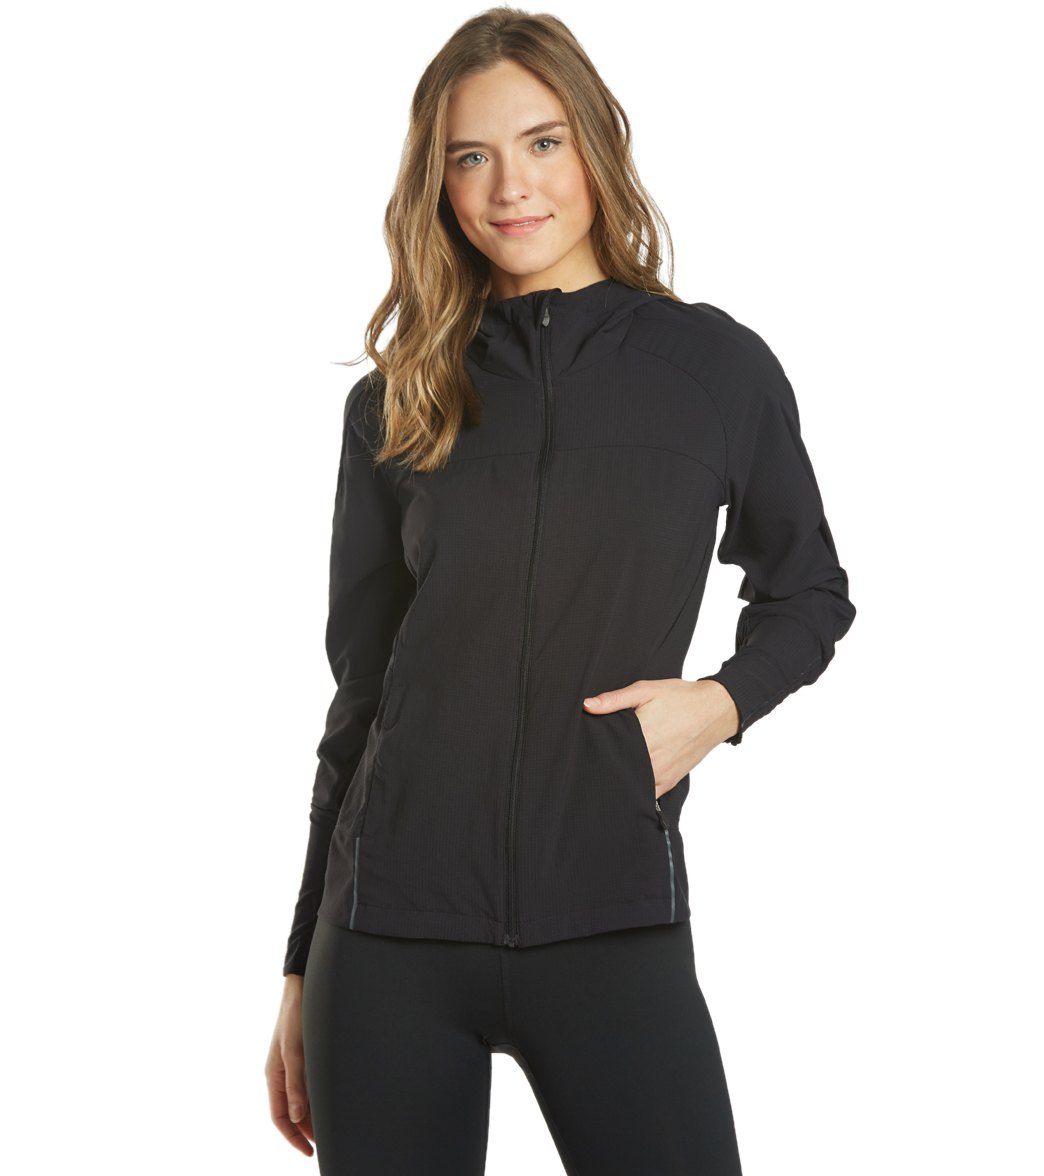 Brooks Women's Canopy Jacket at SwimOutlet.com - Free Shipping